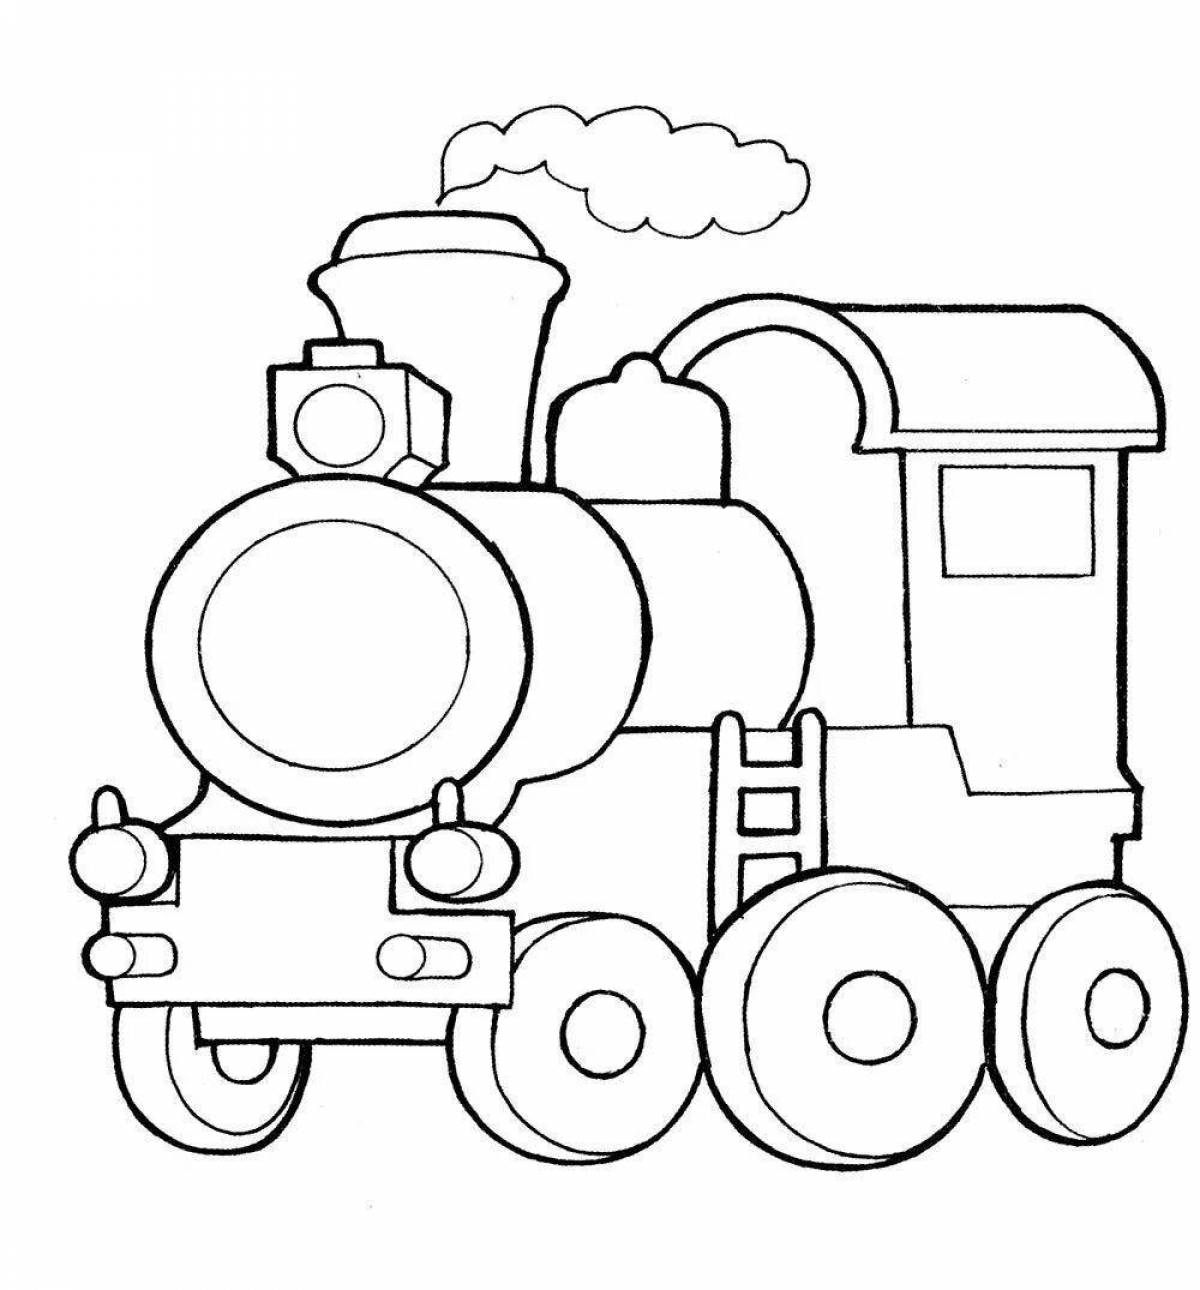 Dynamic train coloring book for boys